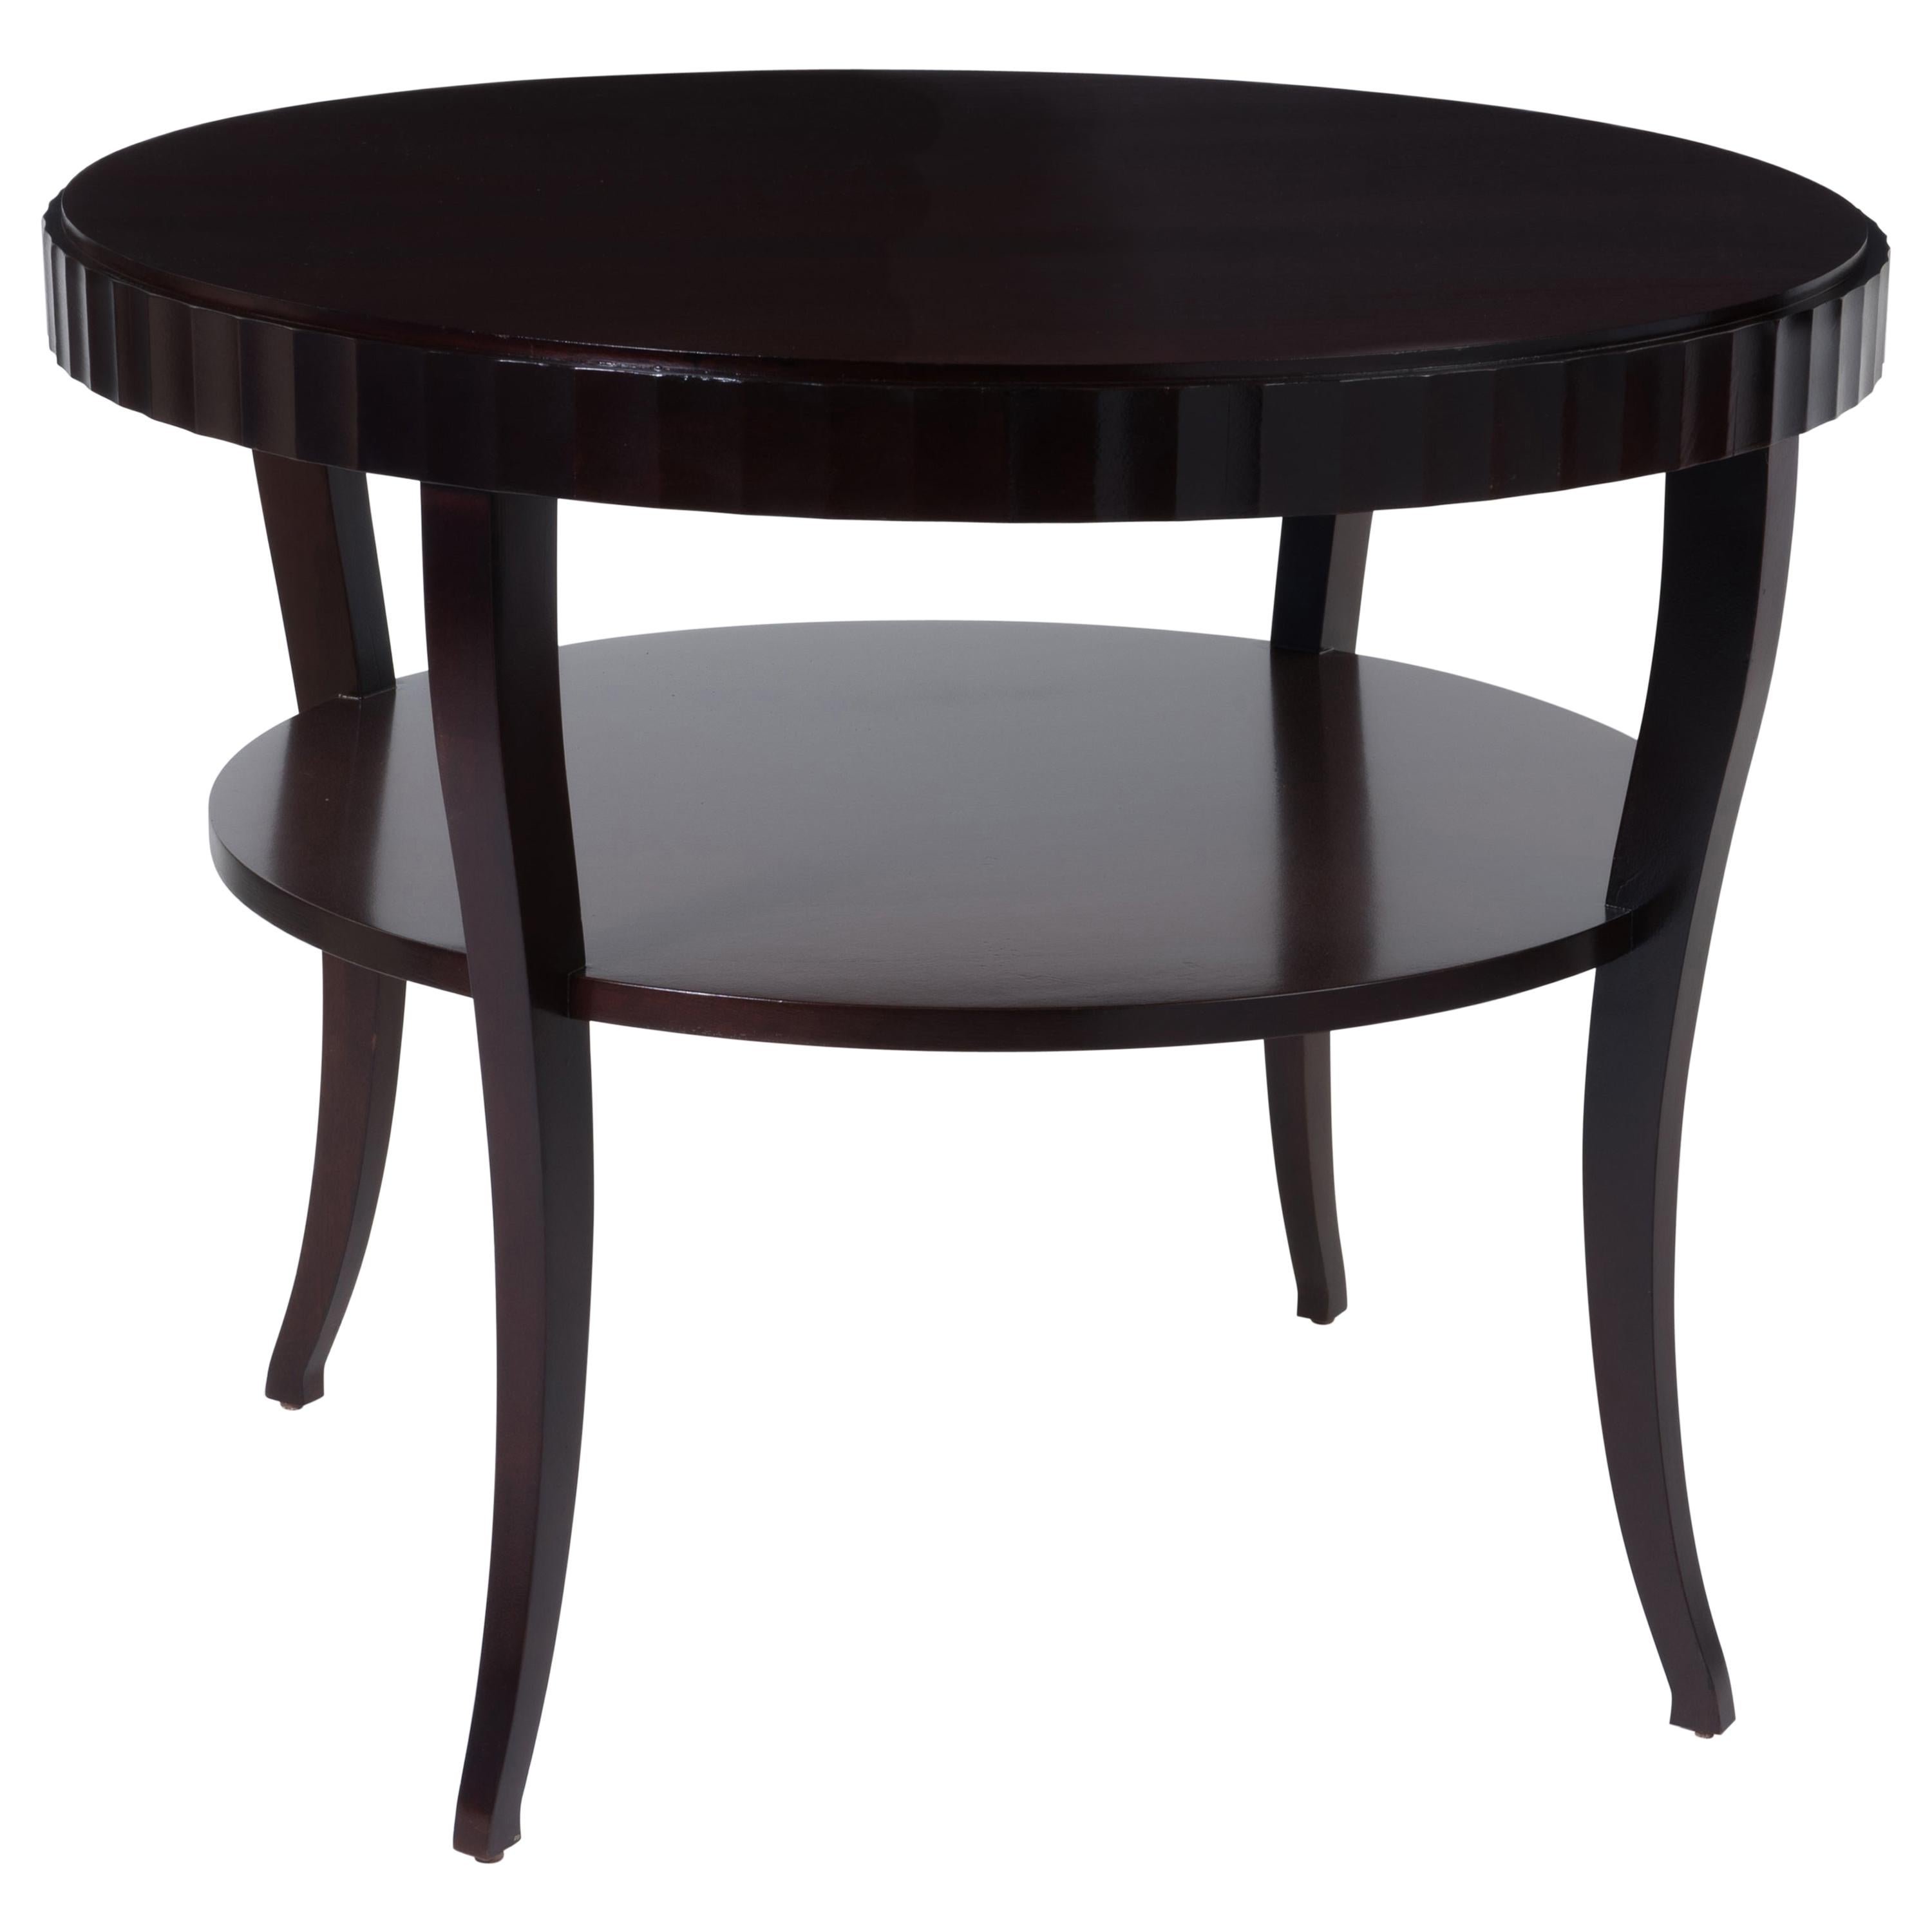 Barbara Barry Mahogany Fluted Center Table For Sale